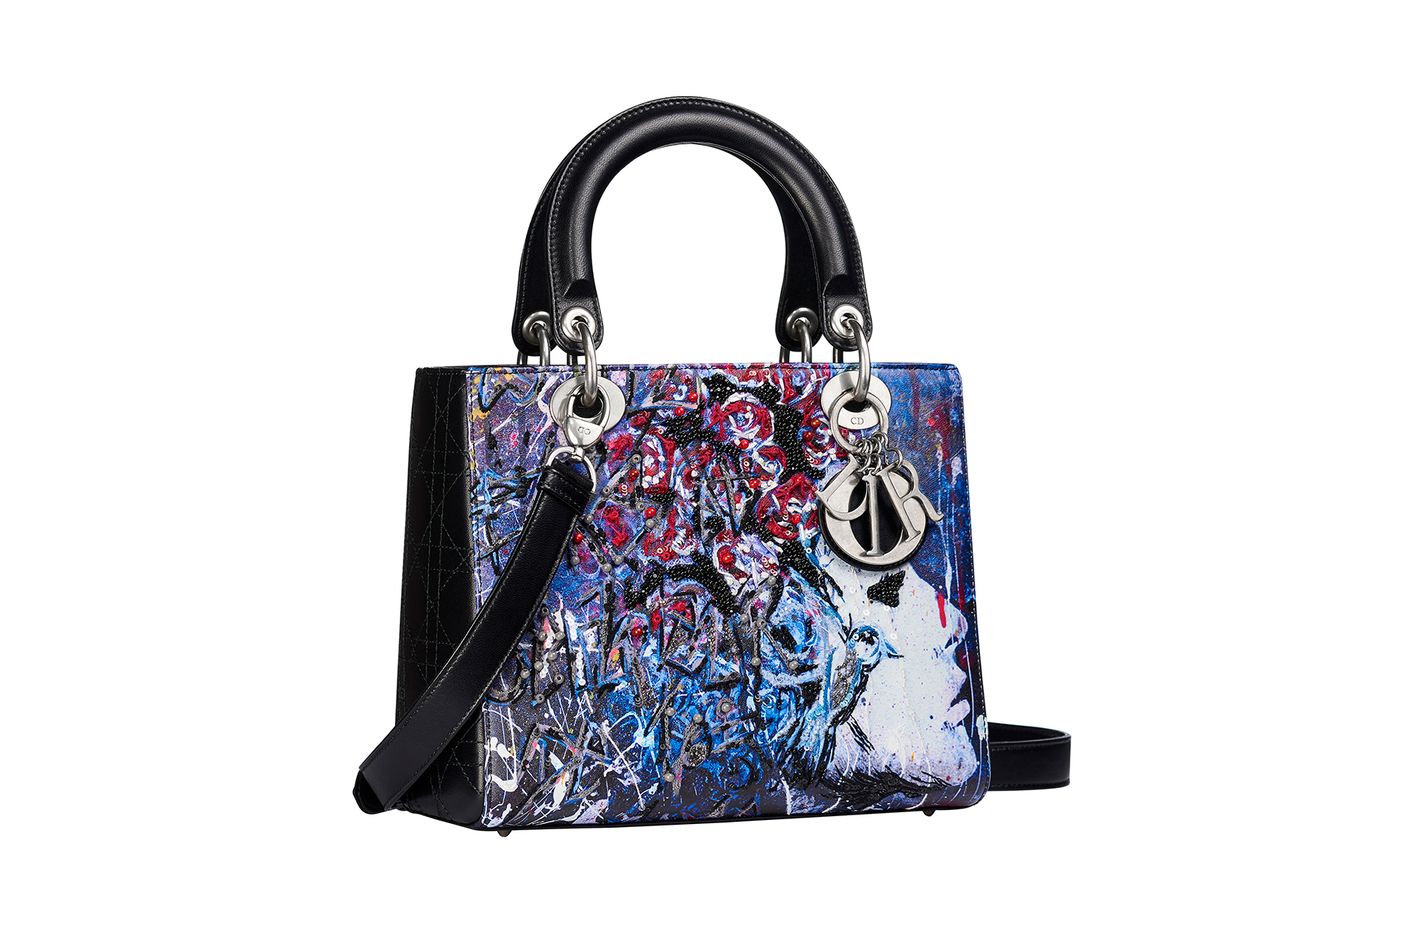 Dior Launches Dior Lady Art #2 at Flagship Store